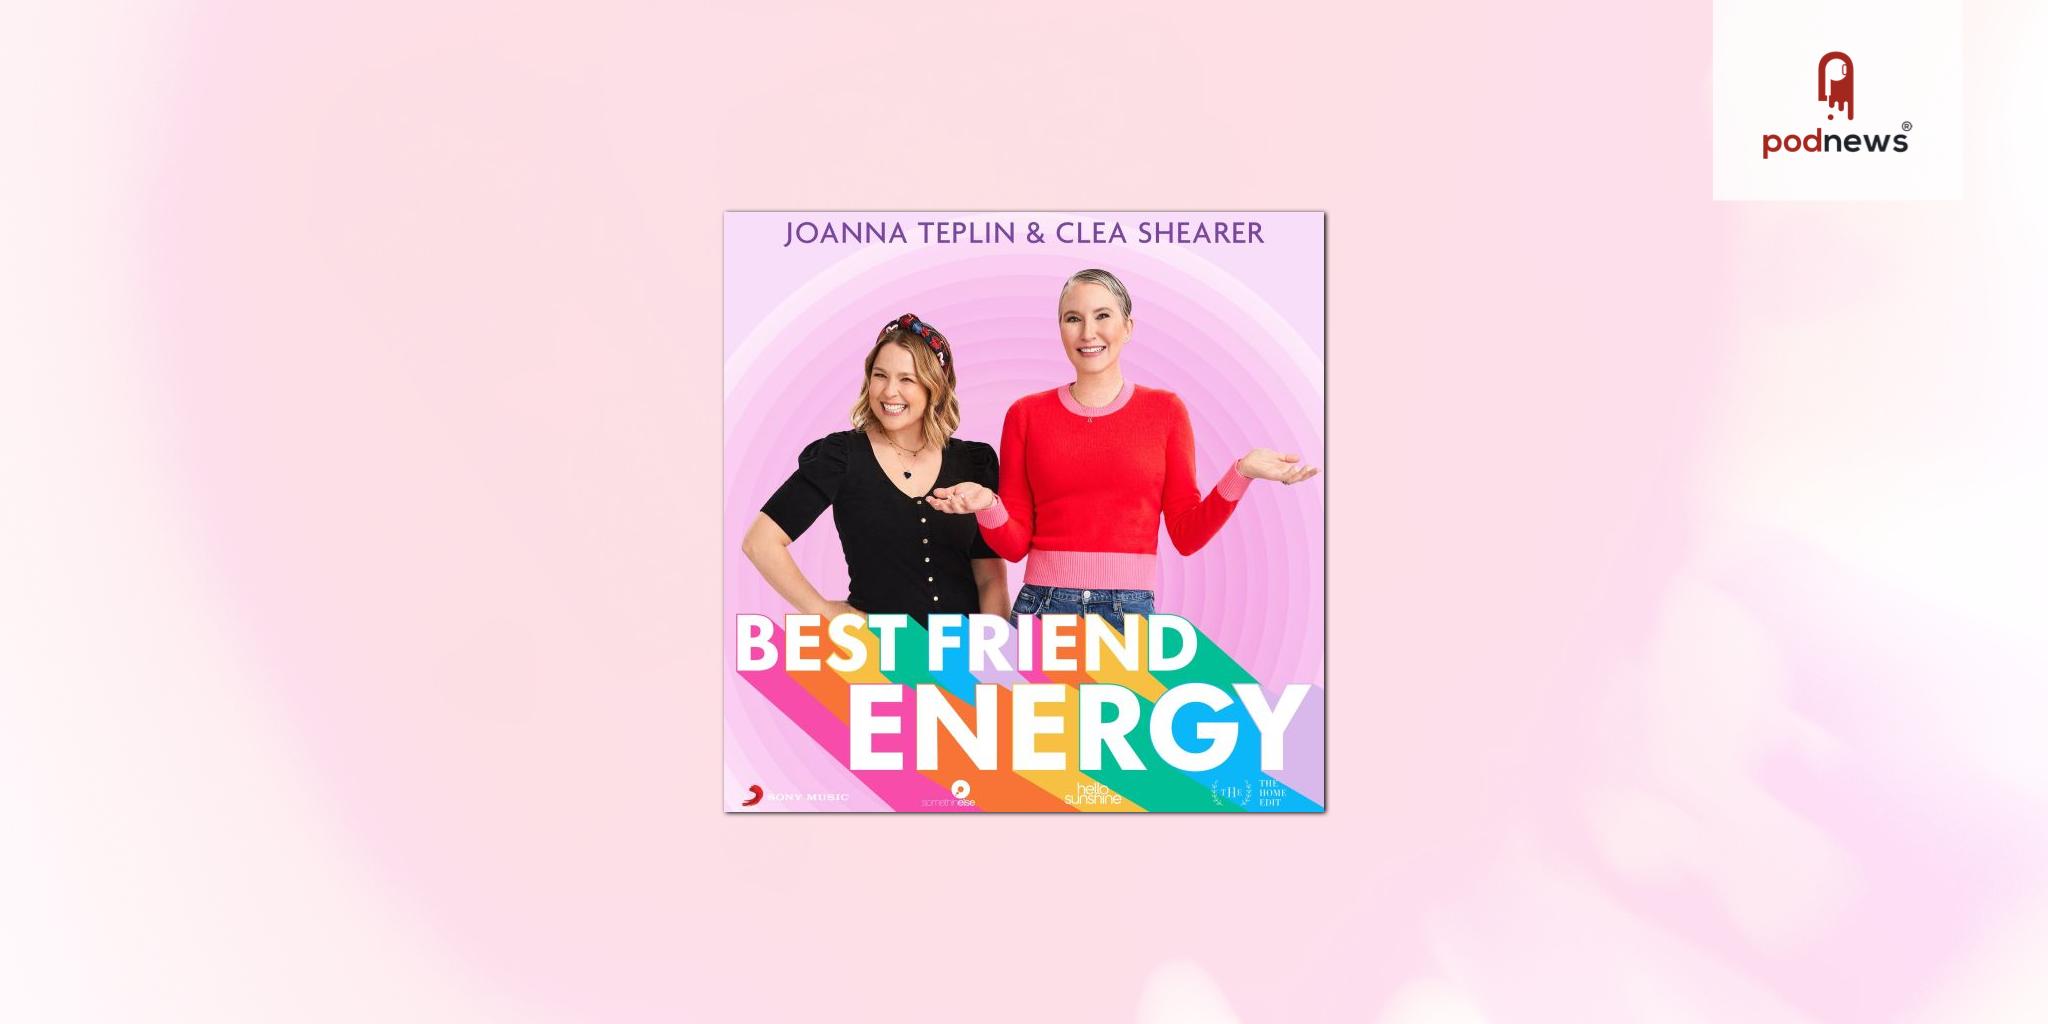 “The Home Edit” founders Clea Shearer and Joanna Teplin get real with new original podcast Best Friend Energy